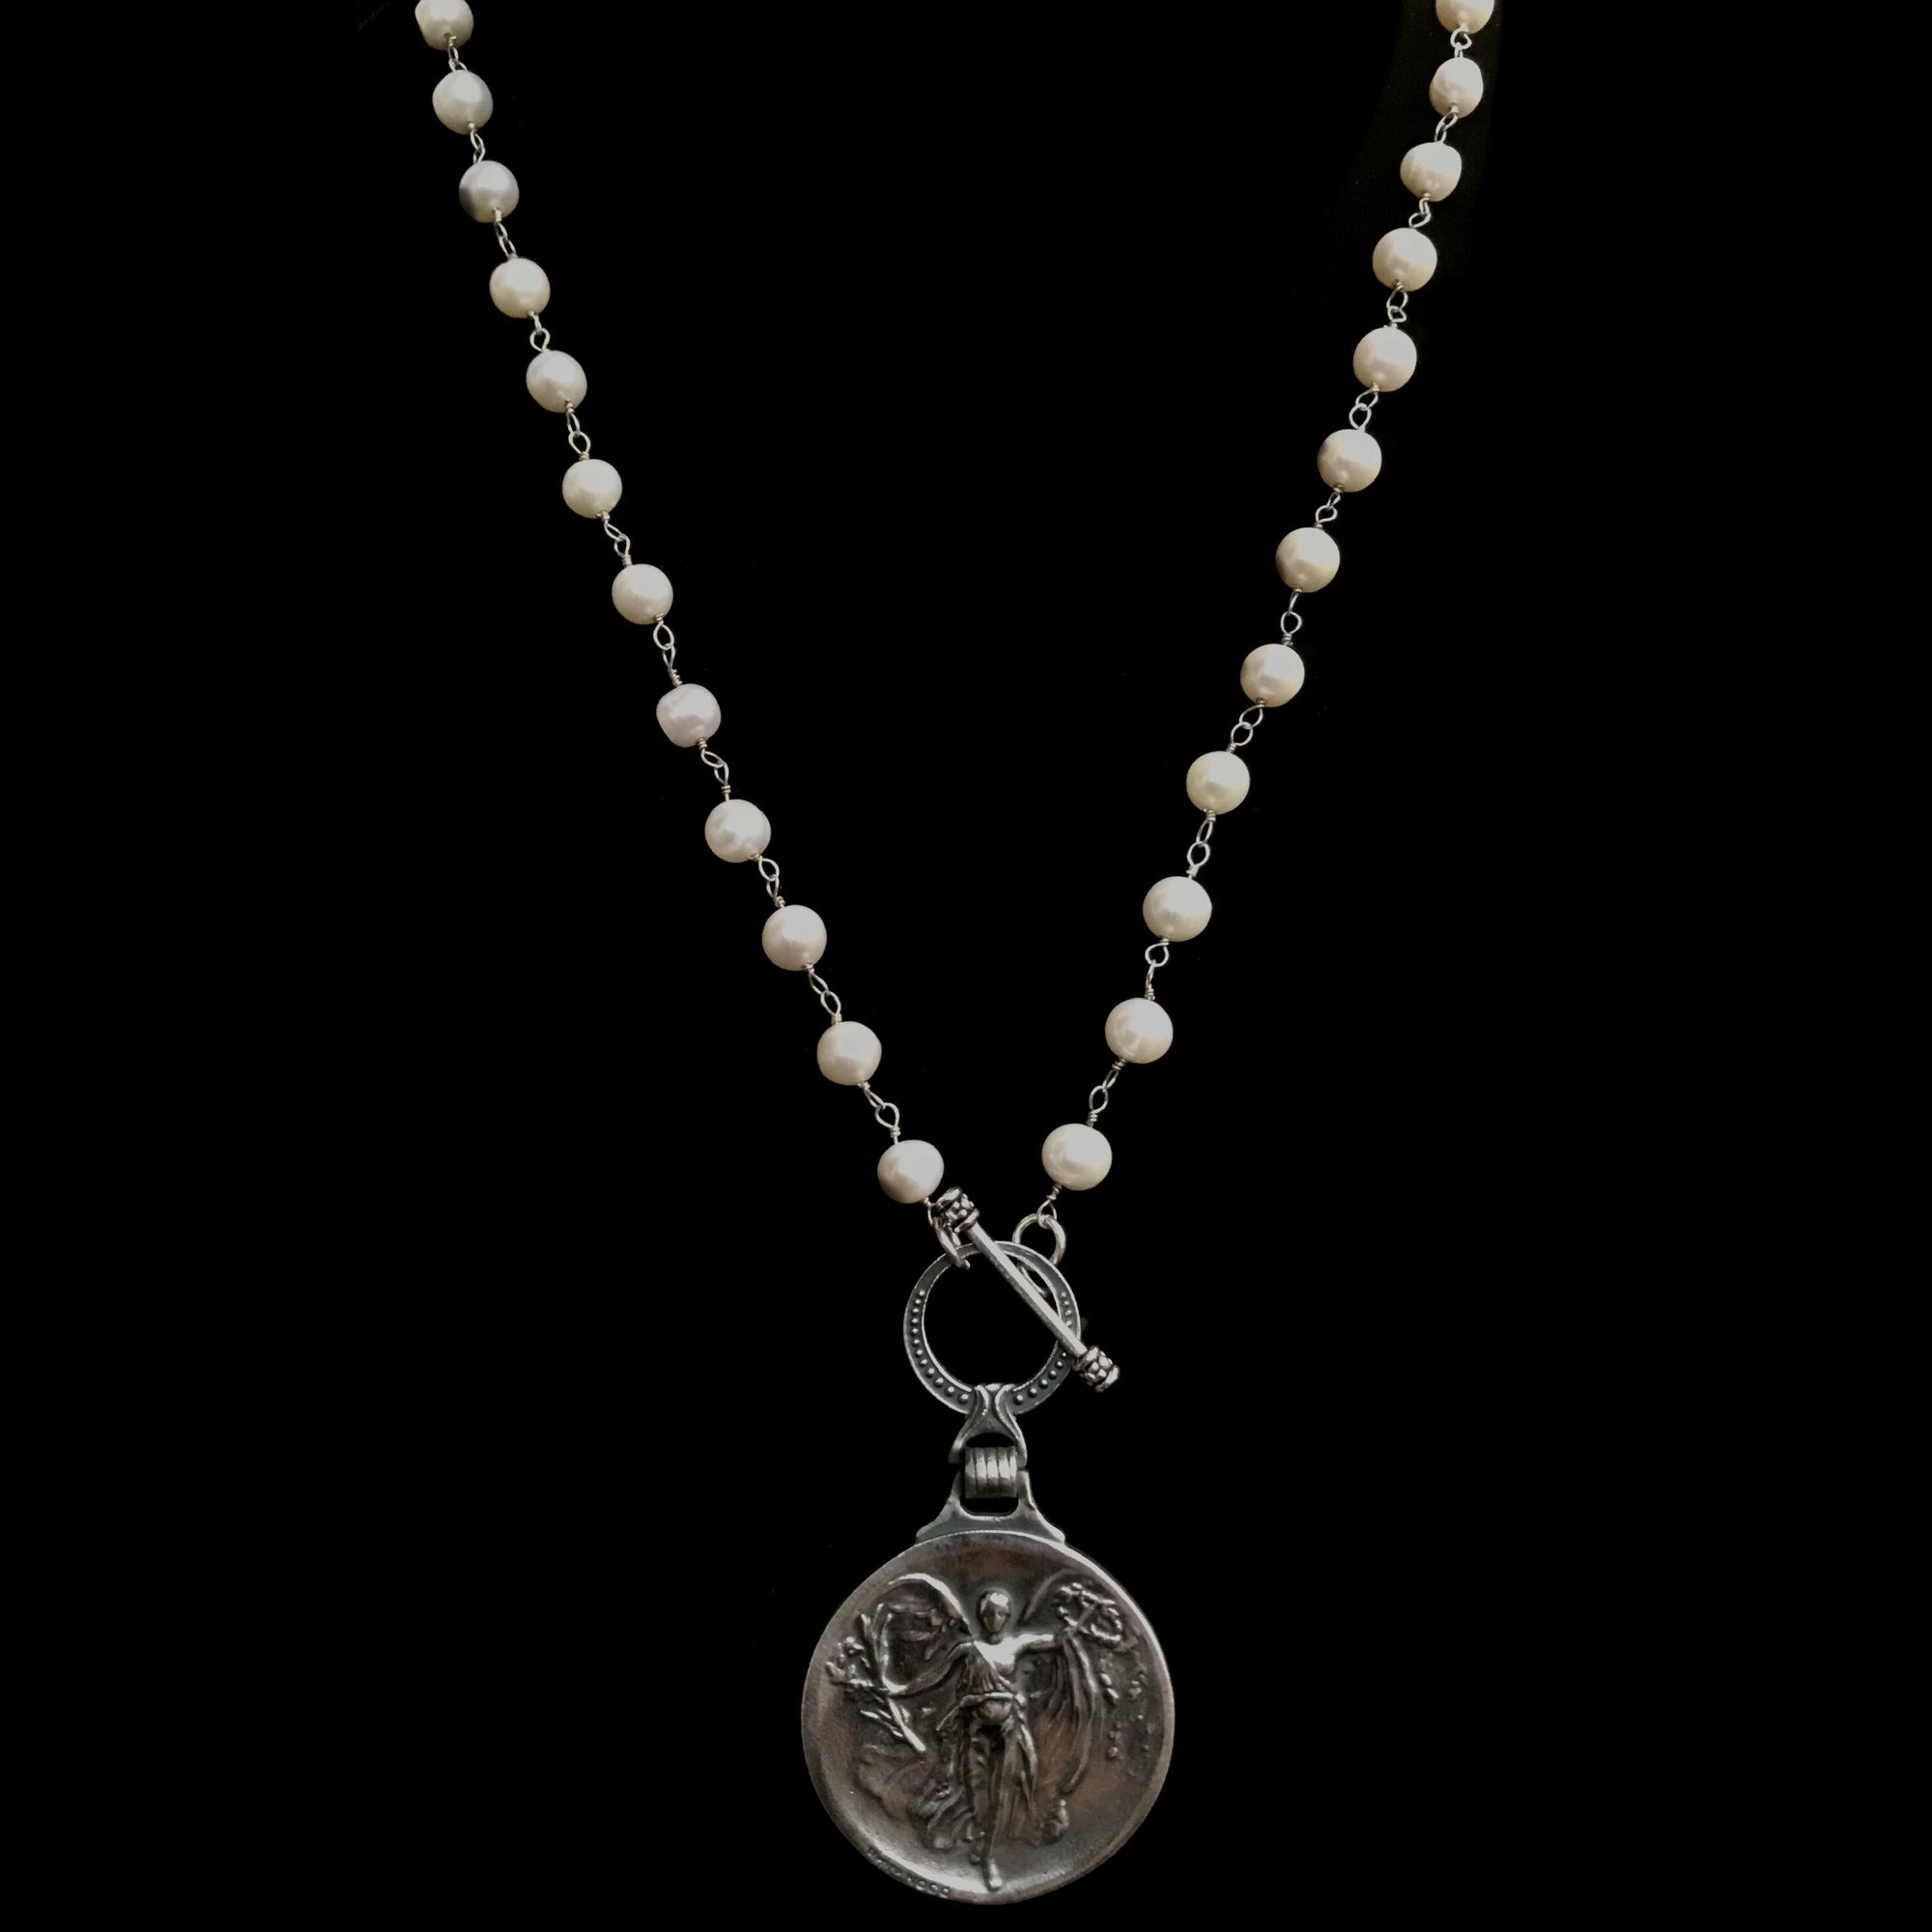 NIke's Flight in White Freshwater Pearl & Sterling Silver Necklace